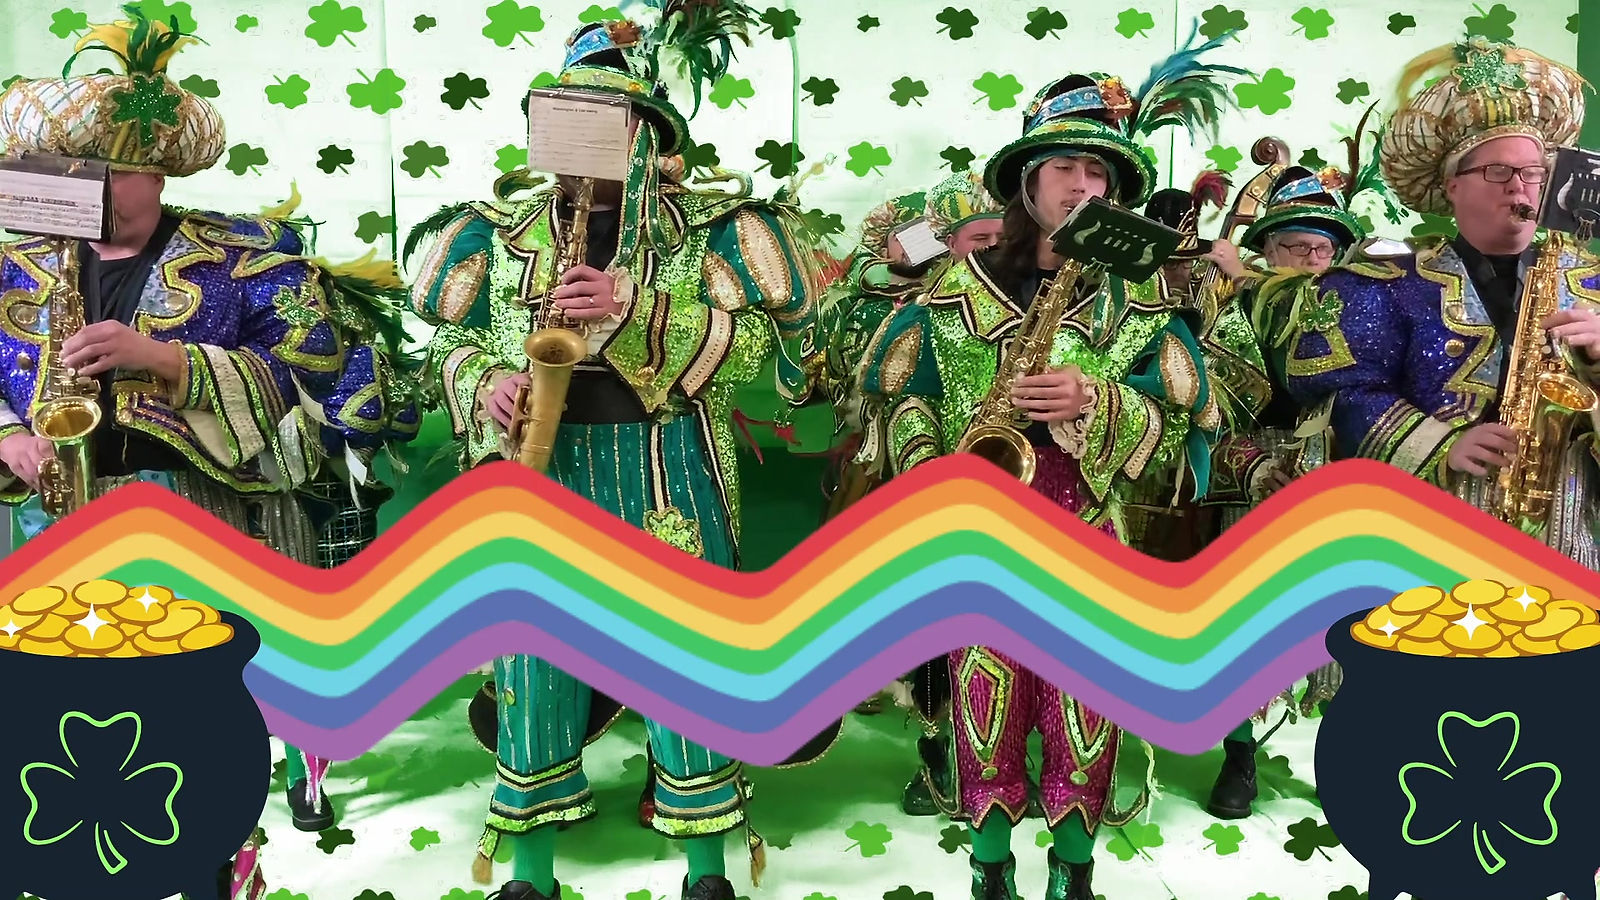 Wishing You a Happy St. Patrick's Day